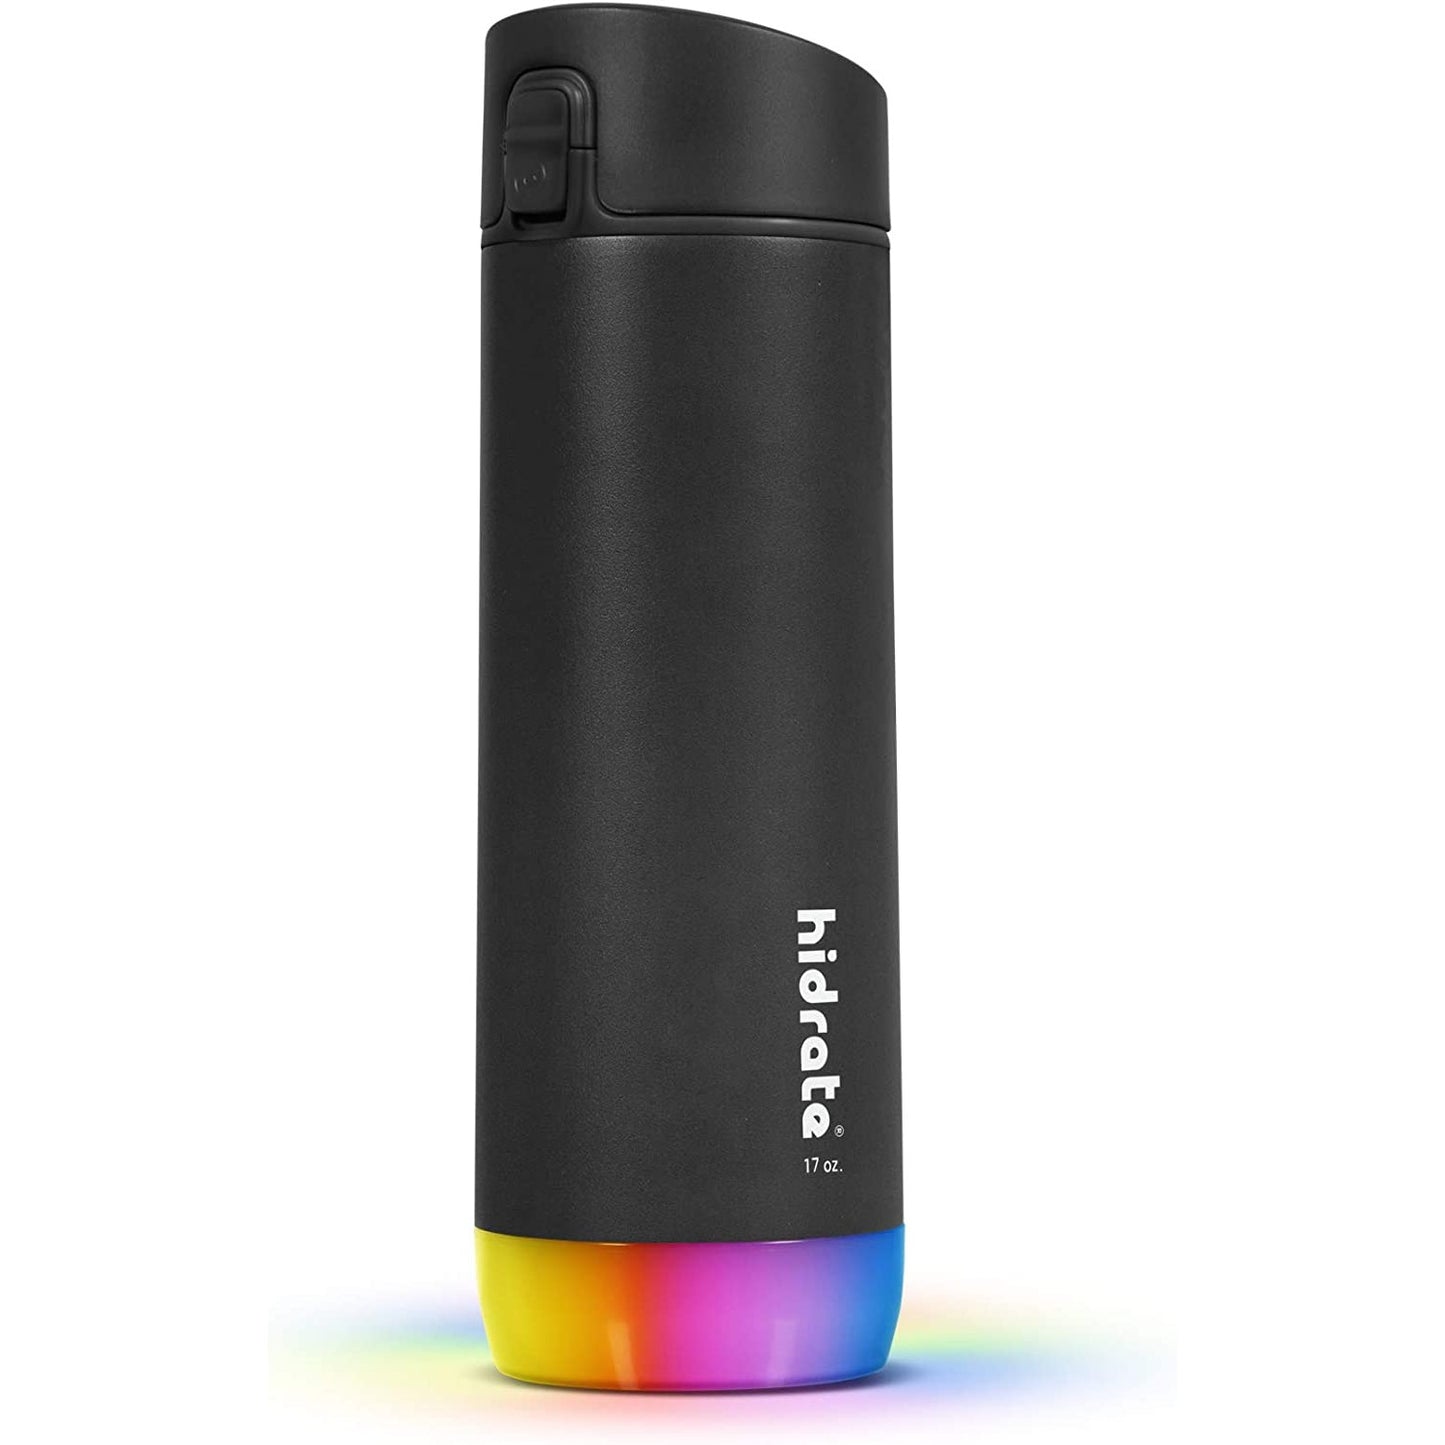 A black Hidrate smart water bottle with a glowing base to remind you to drink more water.